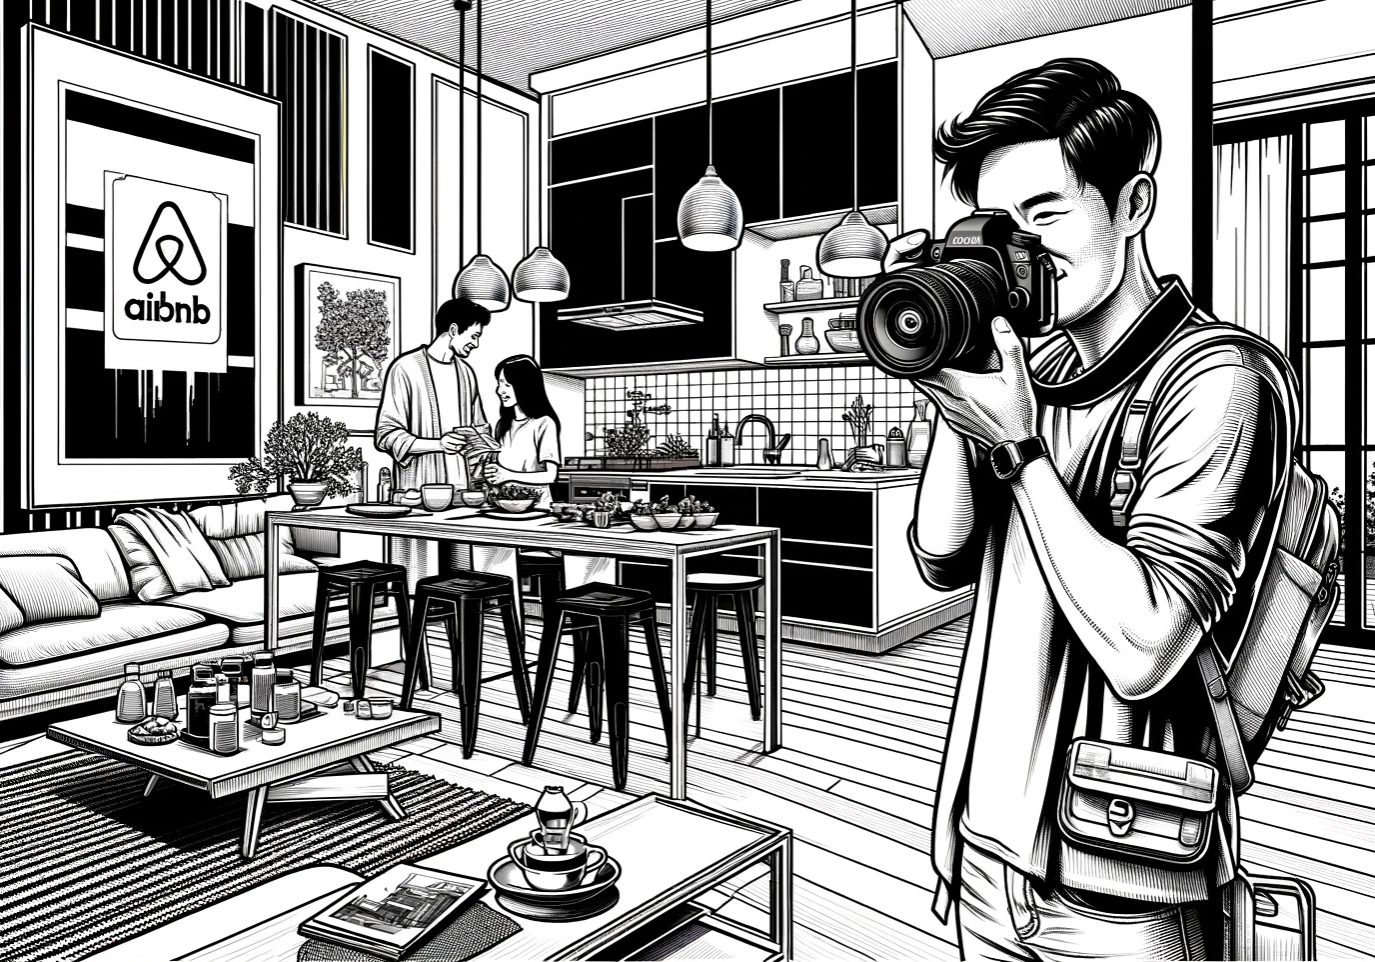 A black and white illustration of a man taking a picture in a living room.